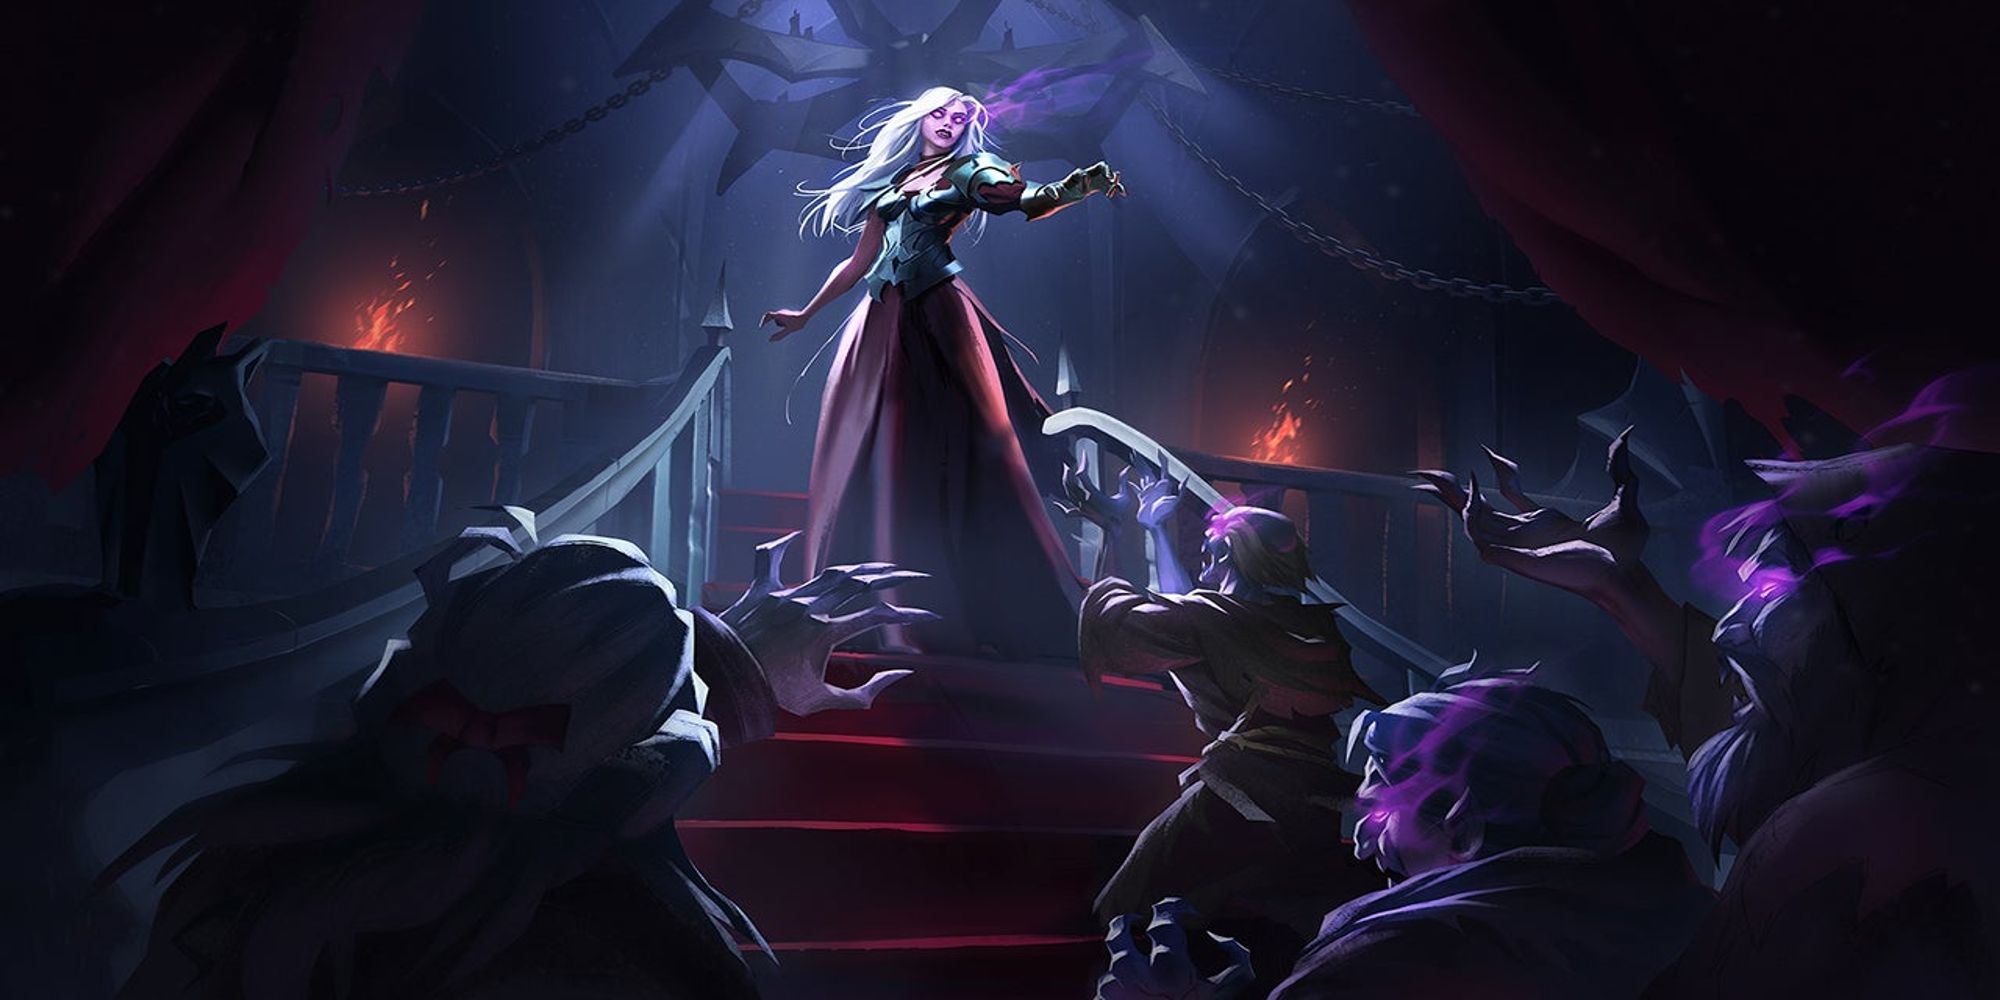 Silver-haired woman stands atop stairs while vampires kneel below her